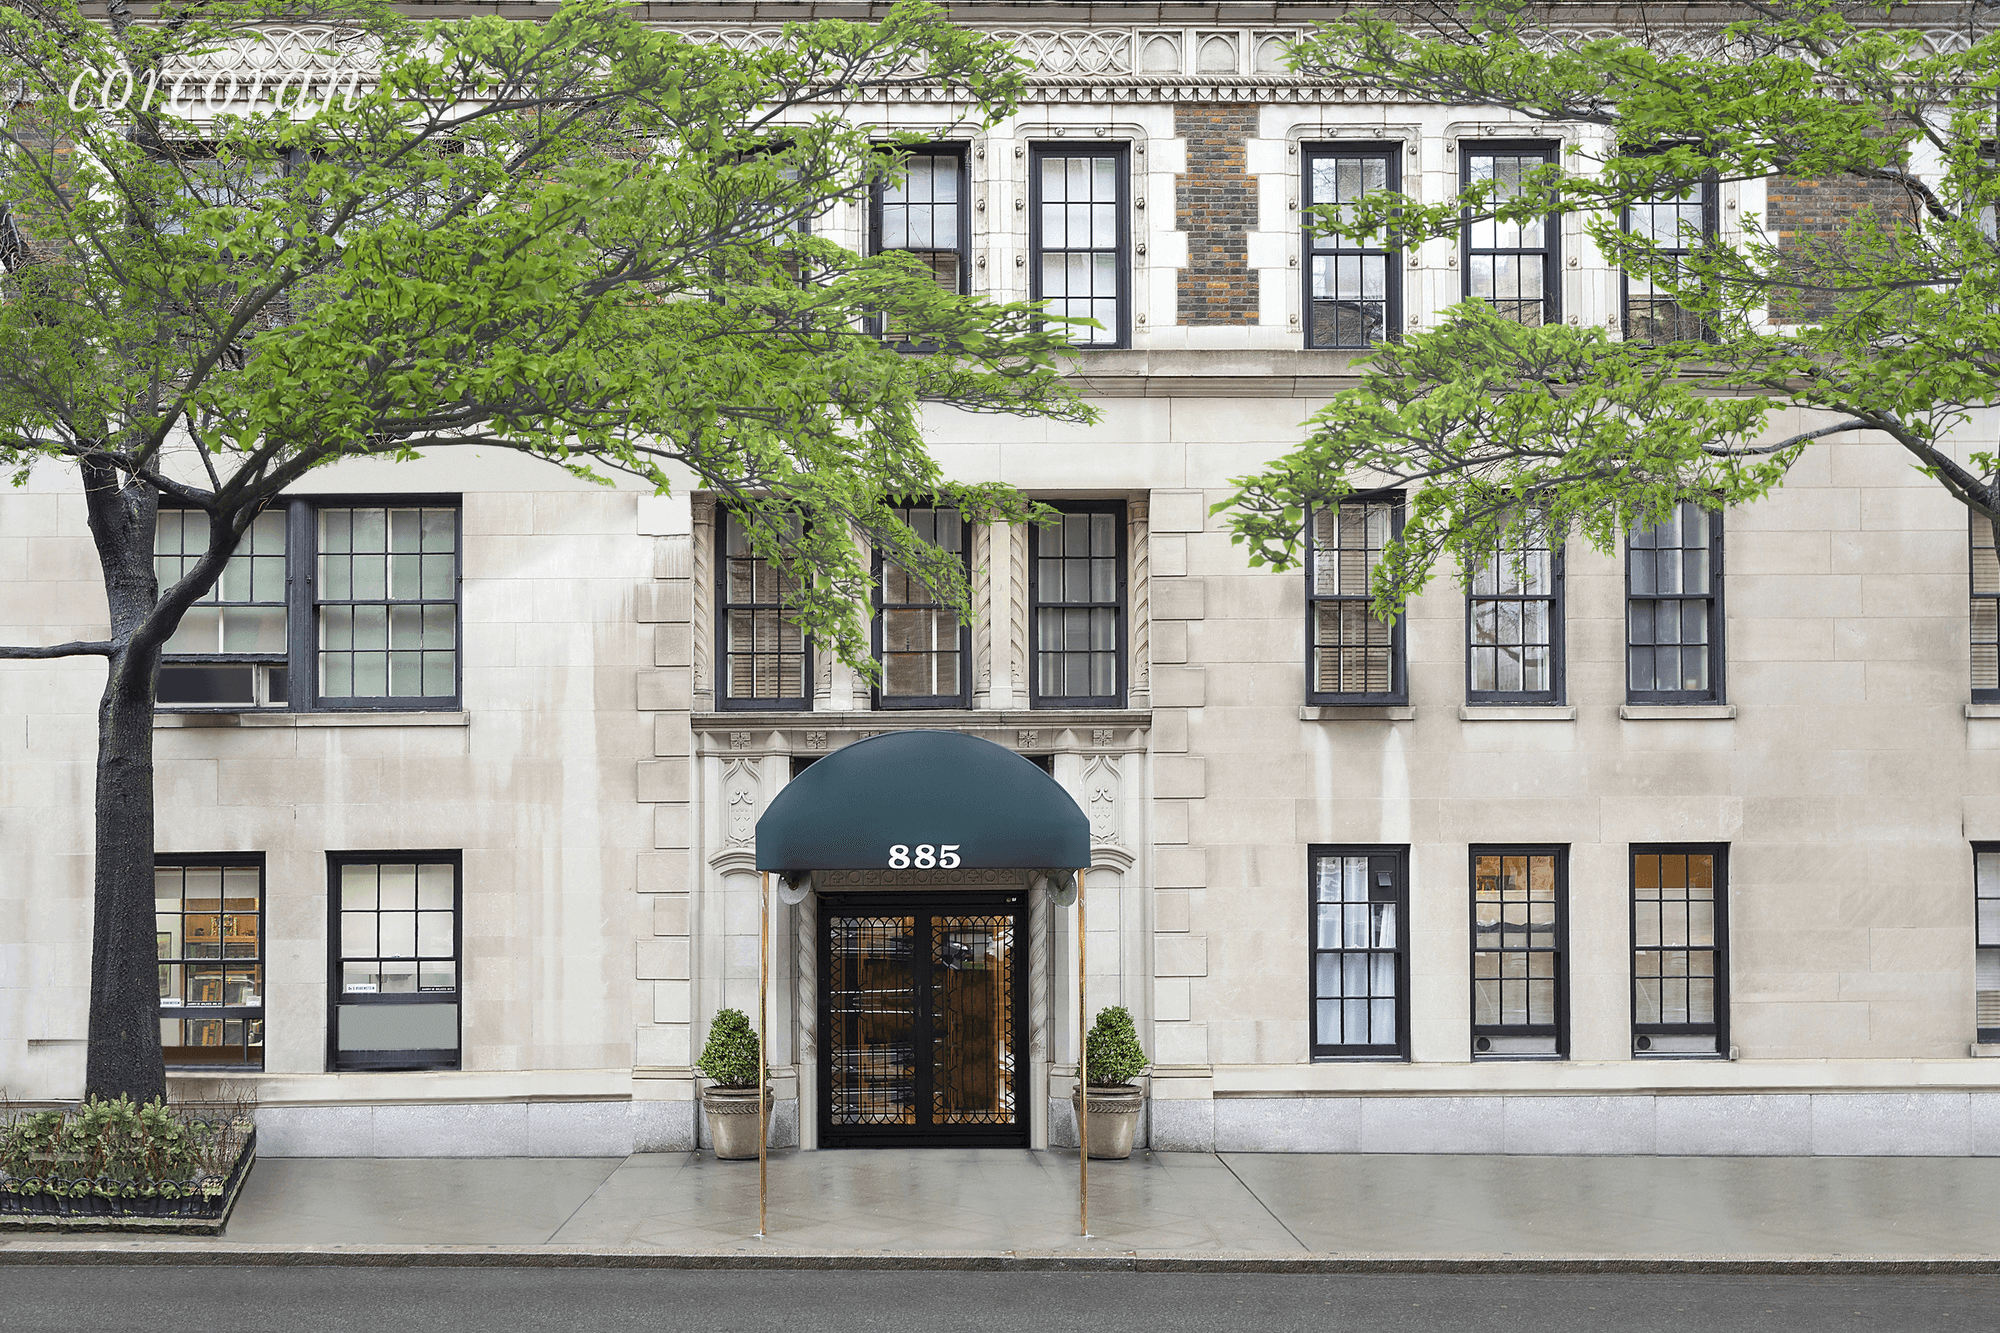 885 Park Avenue, Suite 1A is a prime medical professional office space in an elegant, white glove doorman building found in the landmarked Upper East Side Historic District.